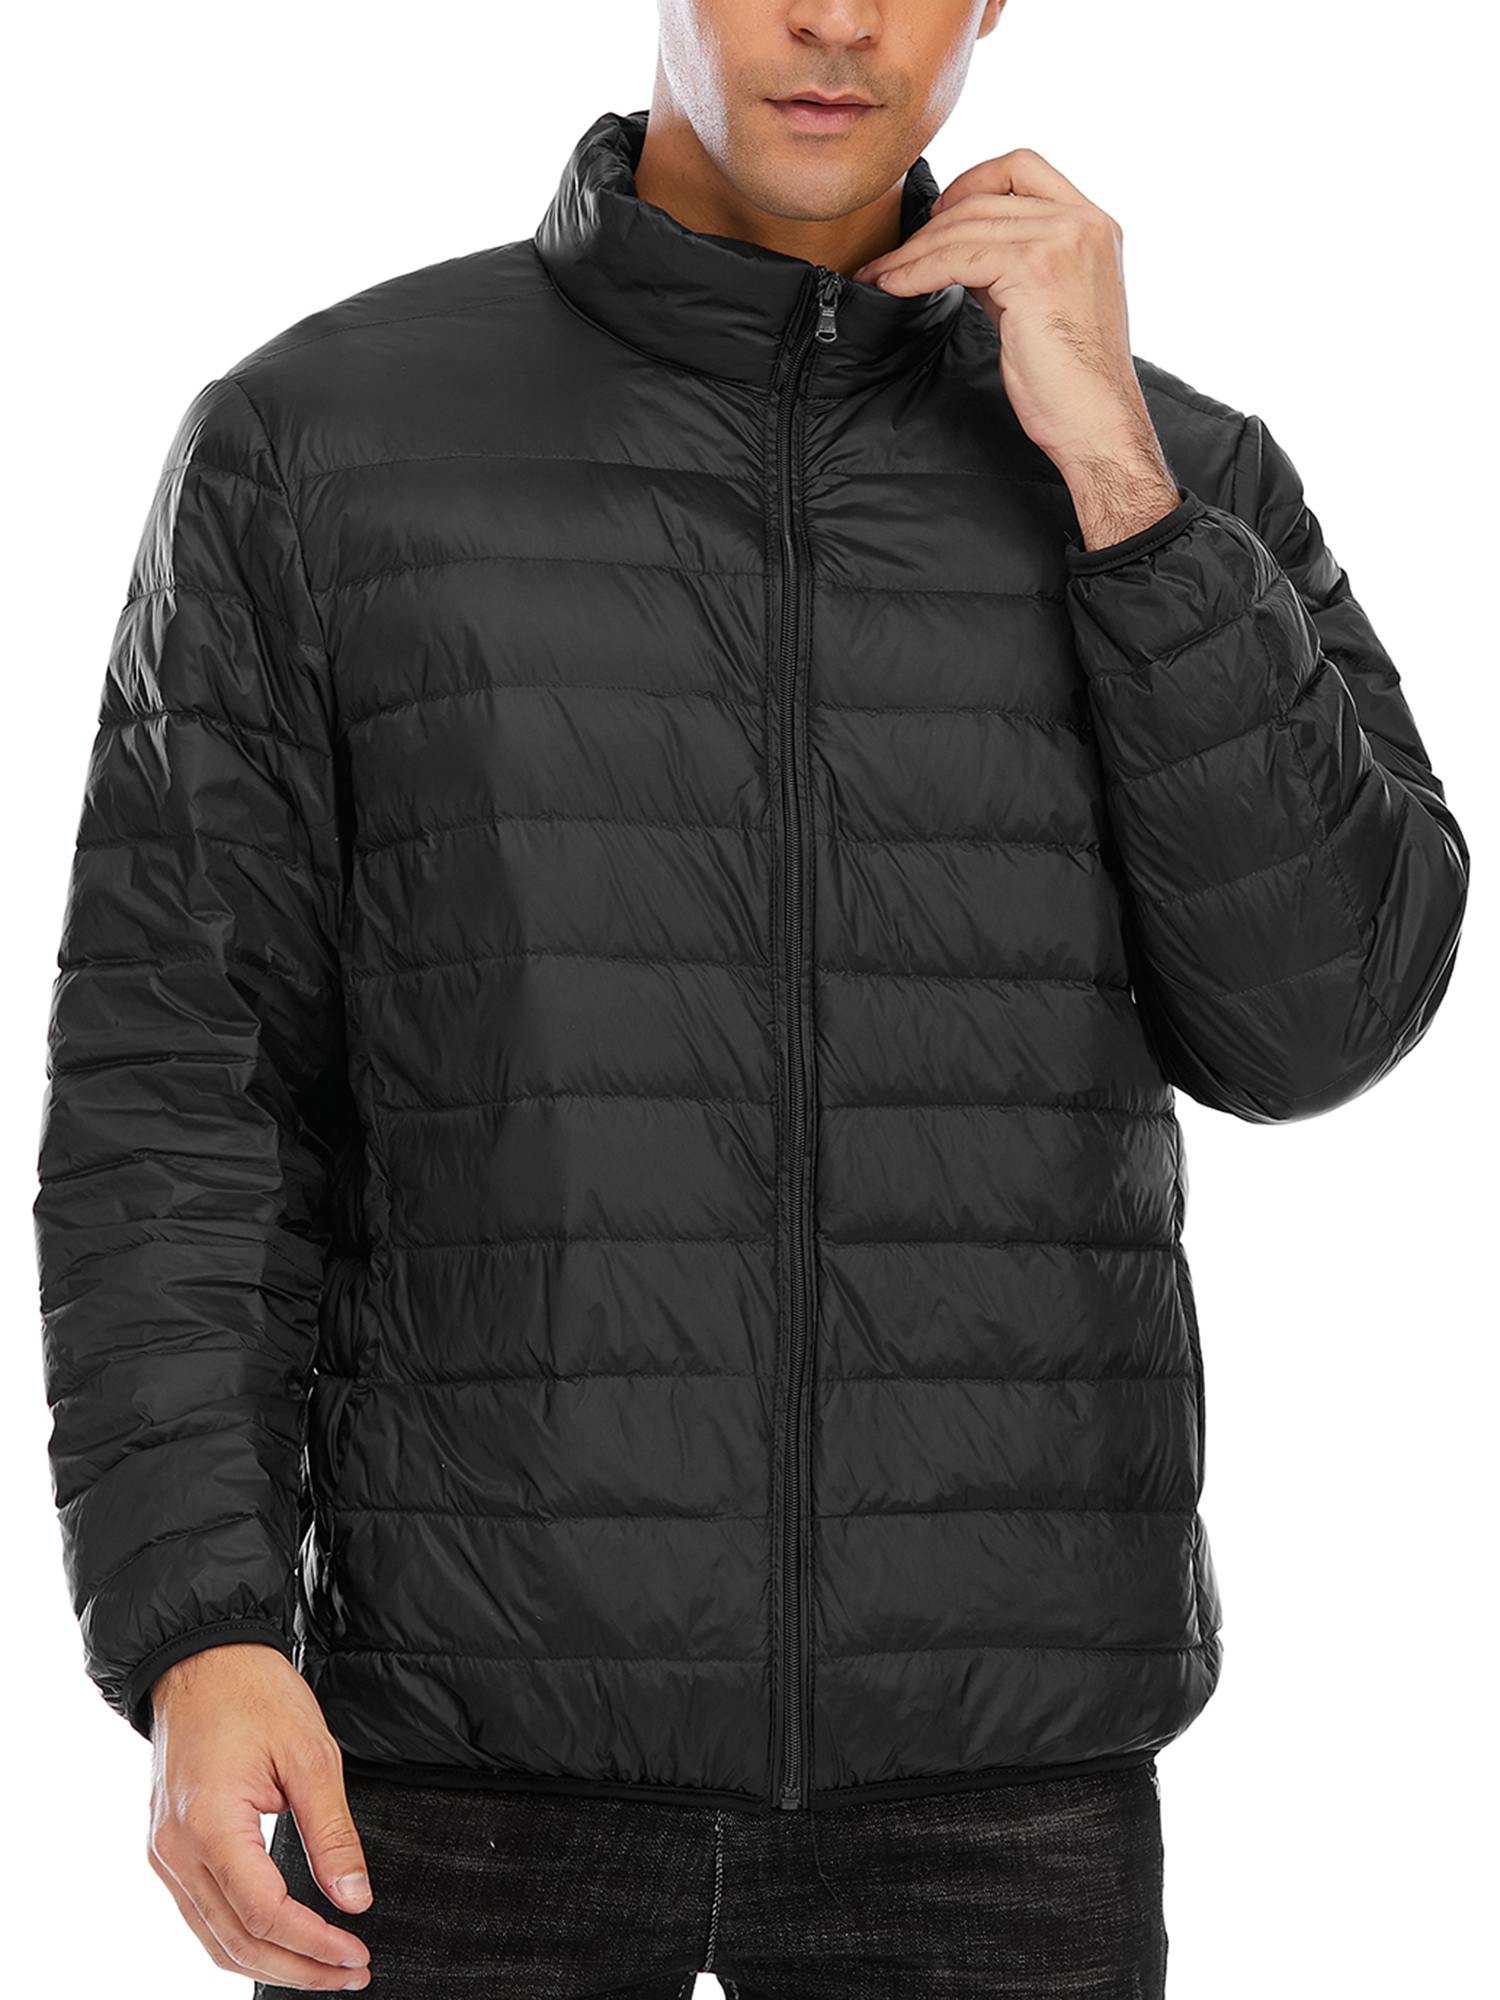 SAYFUT Men's Packable Jacket  Light Weight Water Resistant Windproof Winter Packable Down Puffer Jacket Coat Outerwear, Big & Tall Size S-2XL/Black/Blue - image 1 of 8